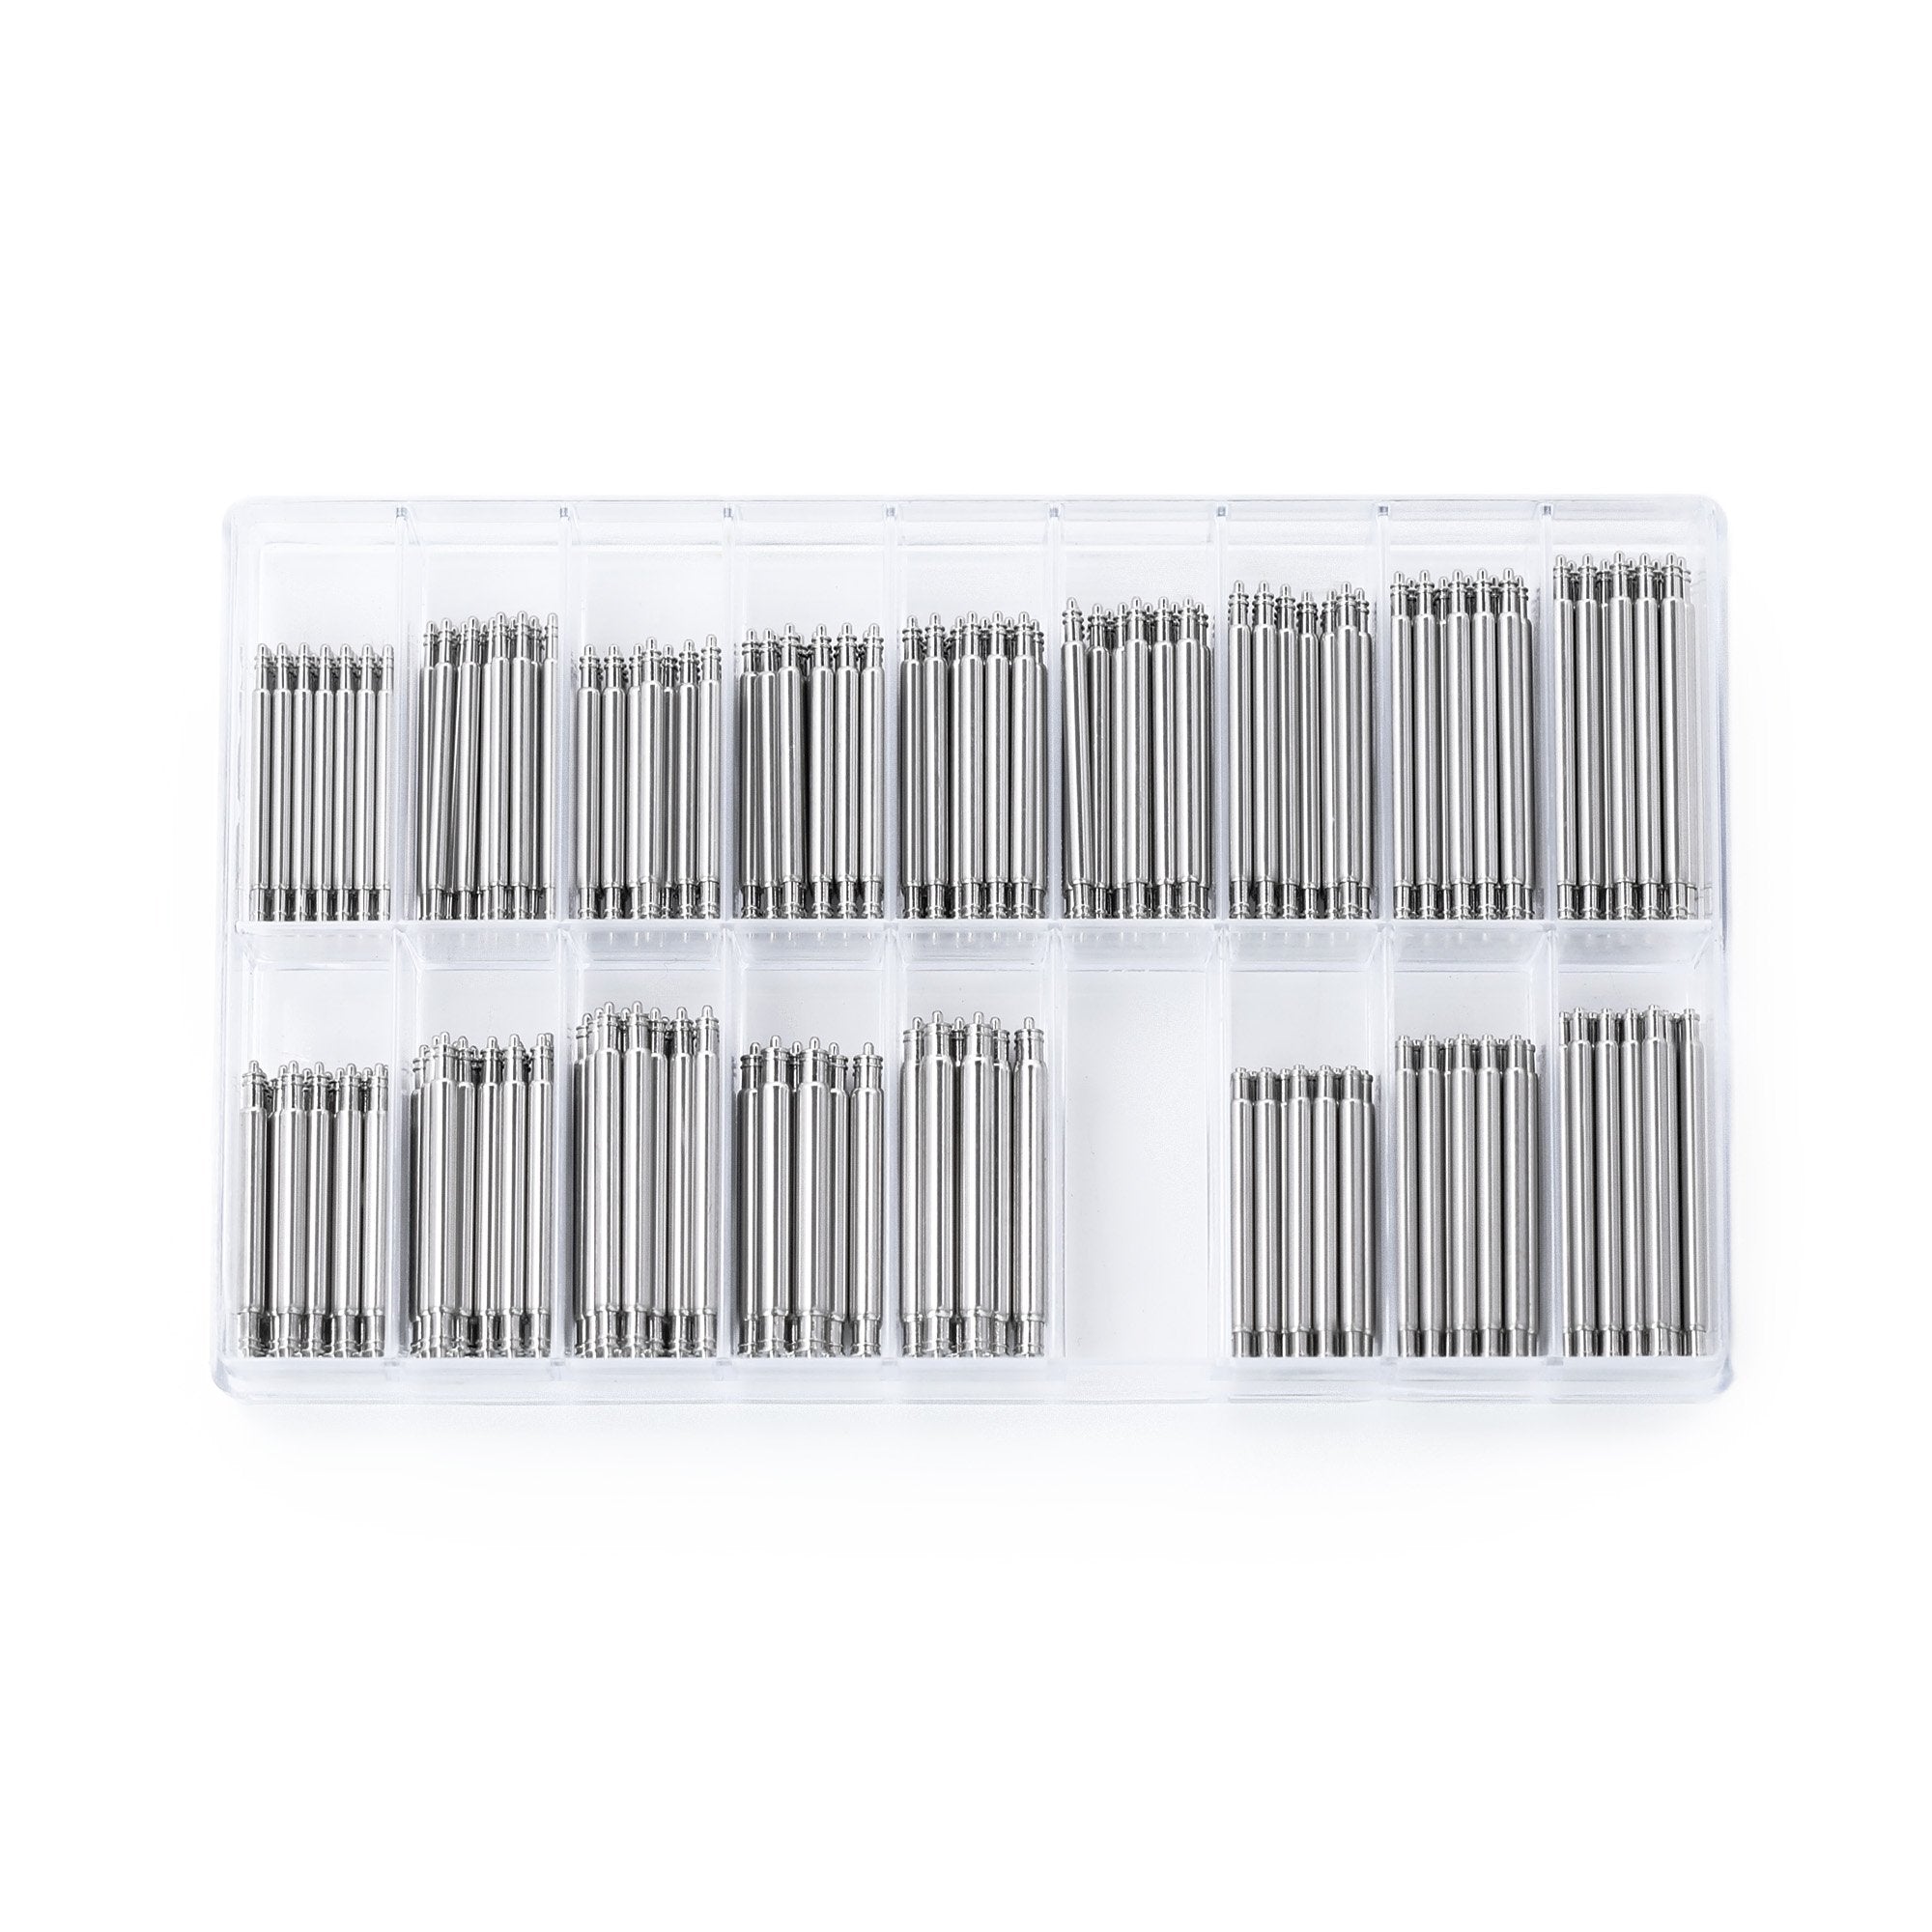 Professional Spring Bar Graded Box for Watch Bands - 320pcs/Box Strapcode Watch Bands Tool